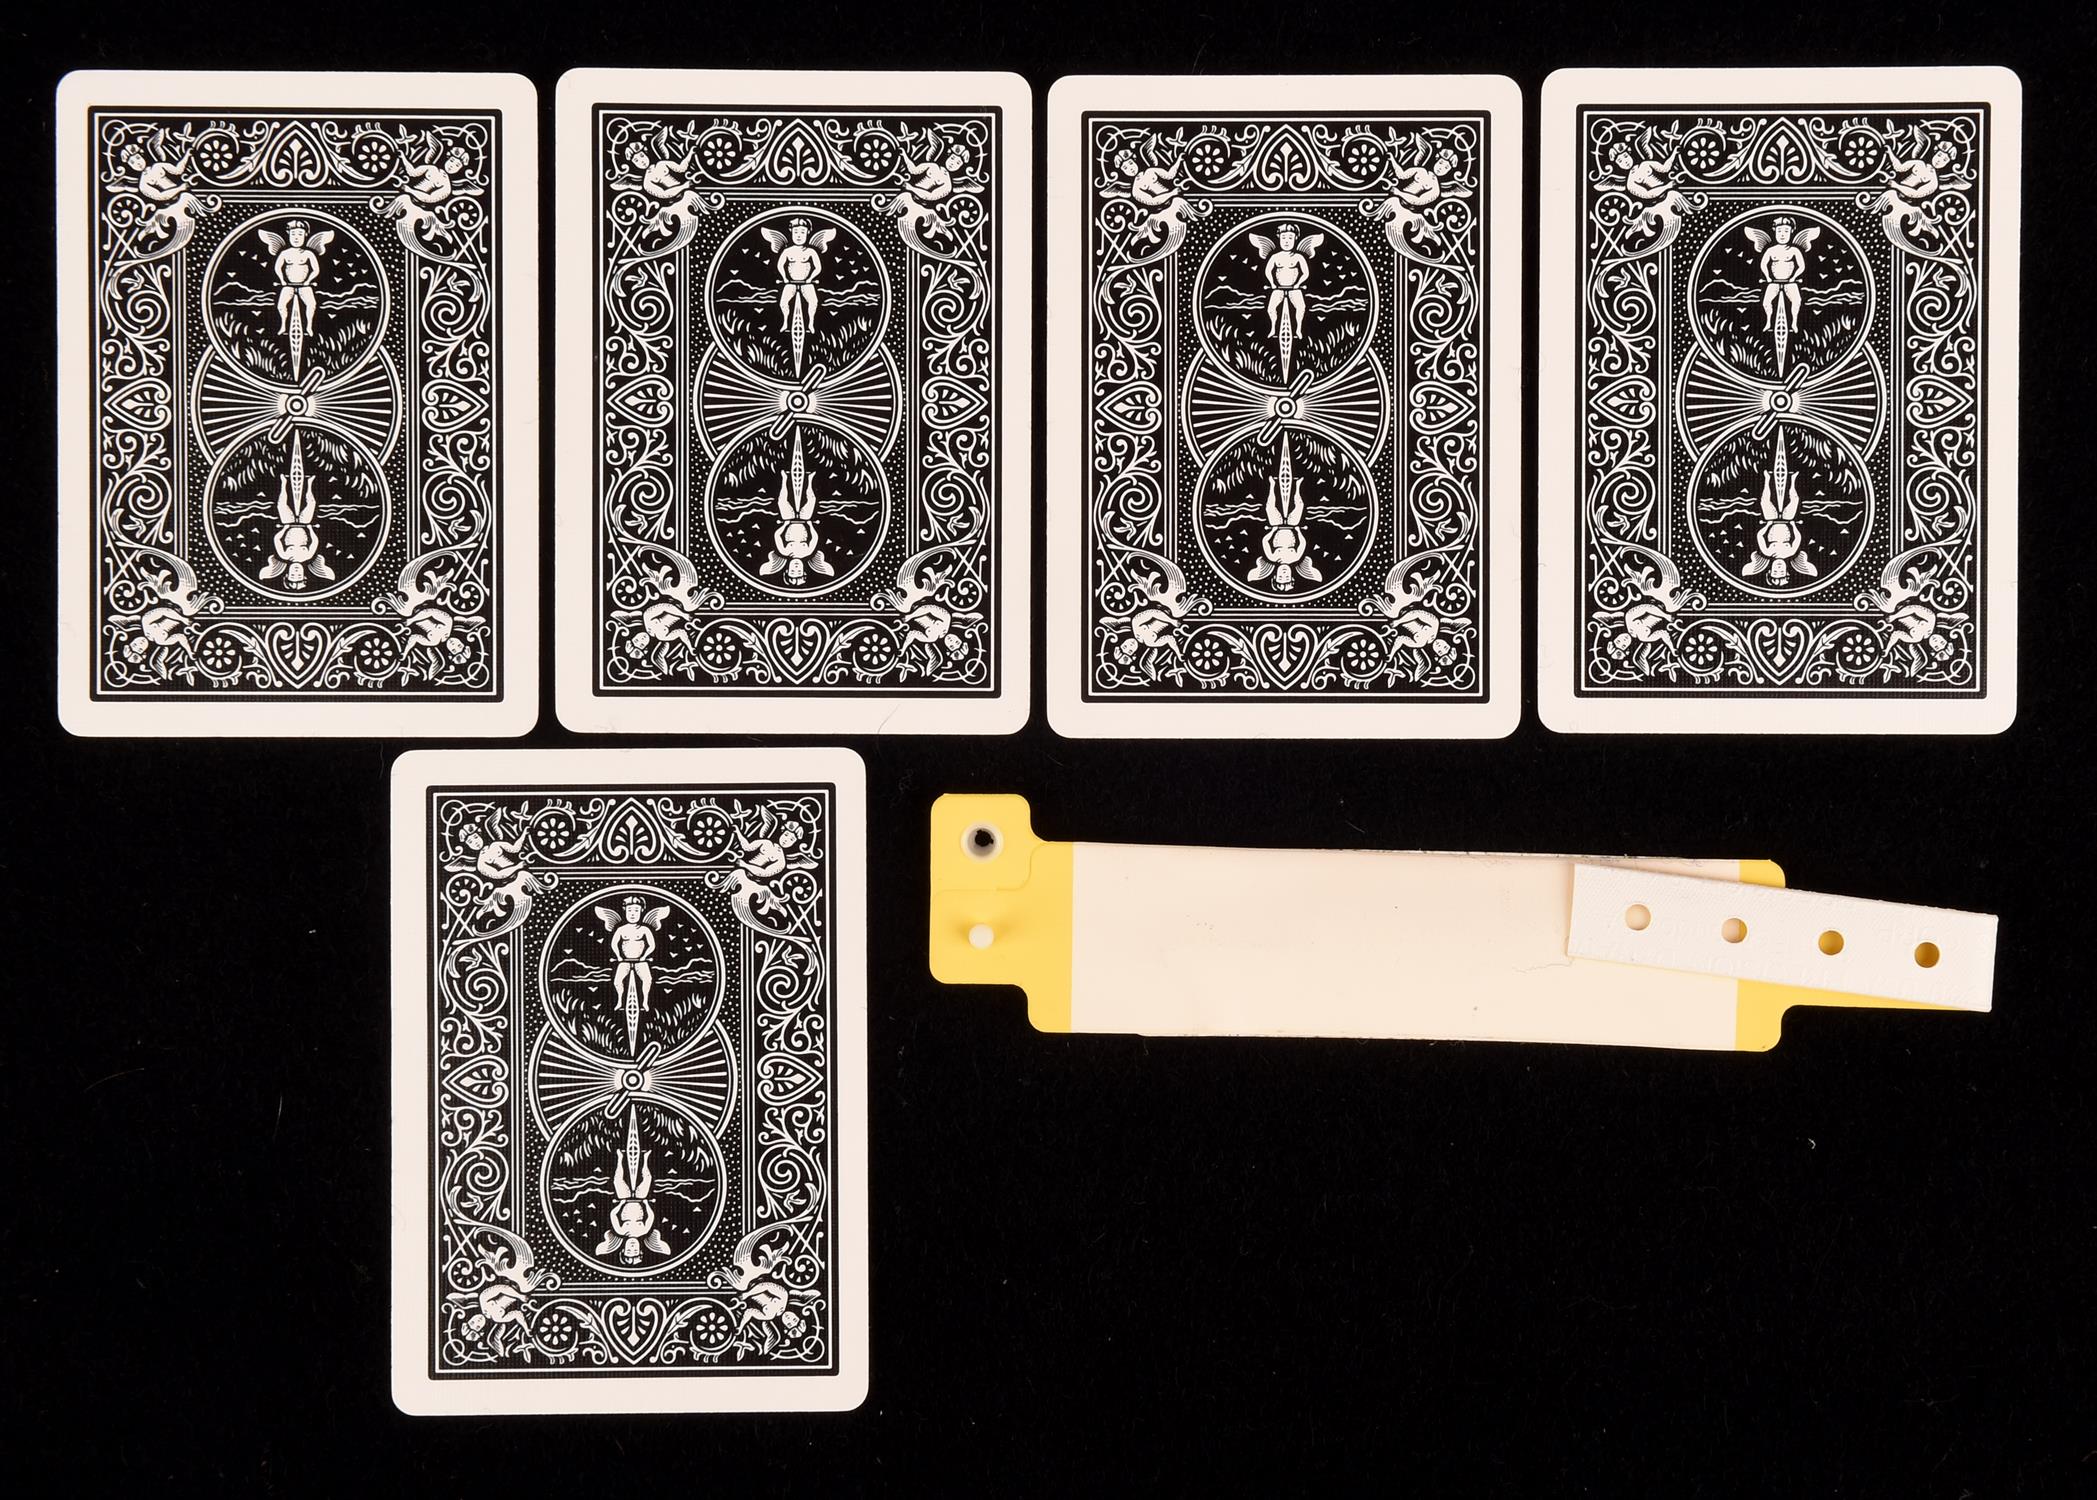 Ava (2020) - A set of Five Playing Cards from the card game between Geena Davis and Jessica - Image 2 of 2